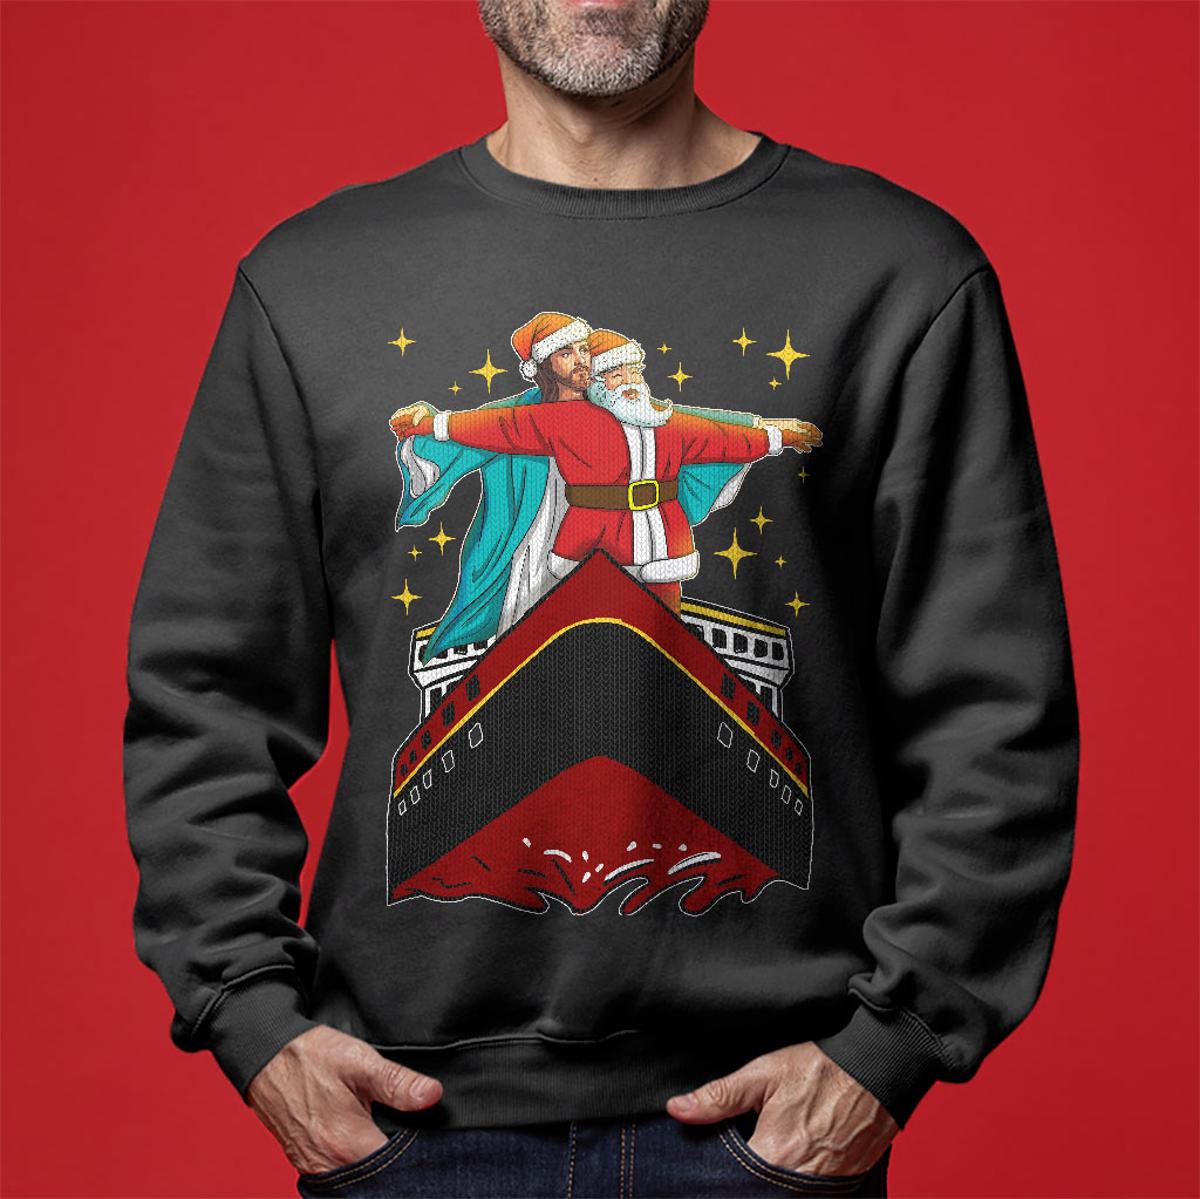 All I Want For Christmas Is Money Funny Christmas Sweaters